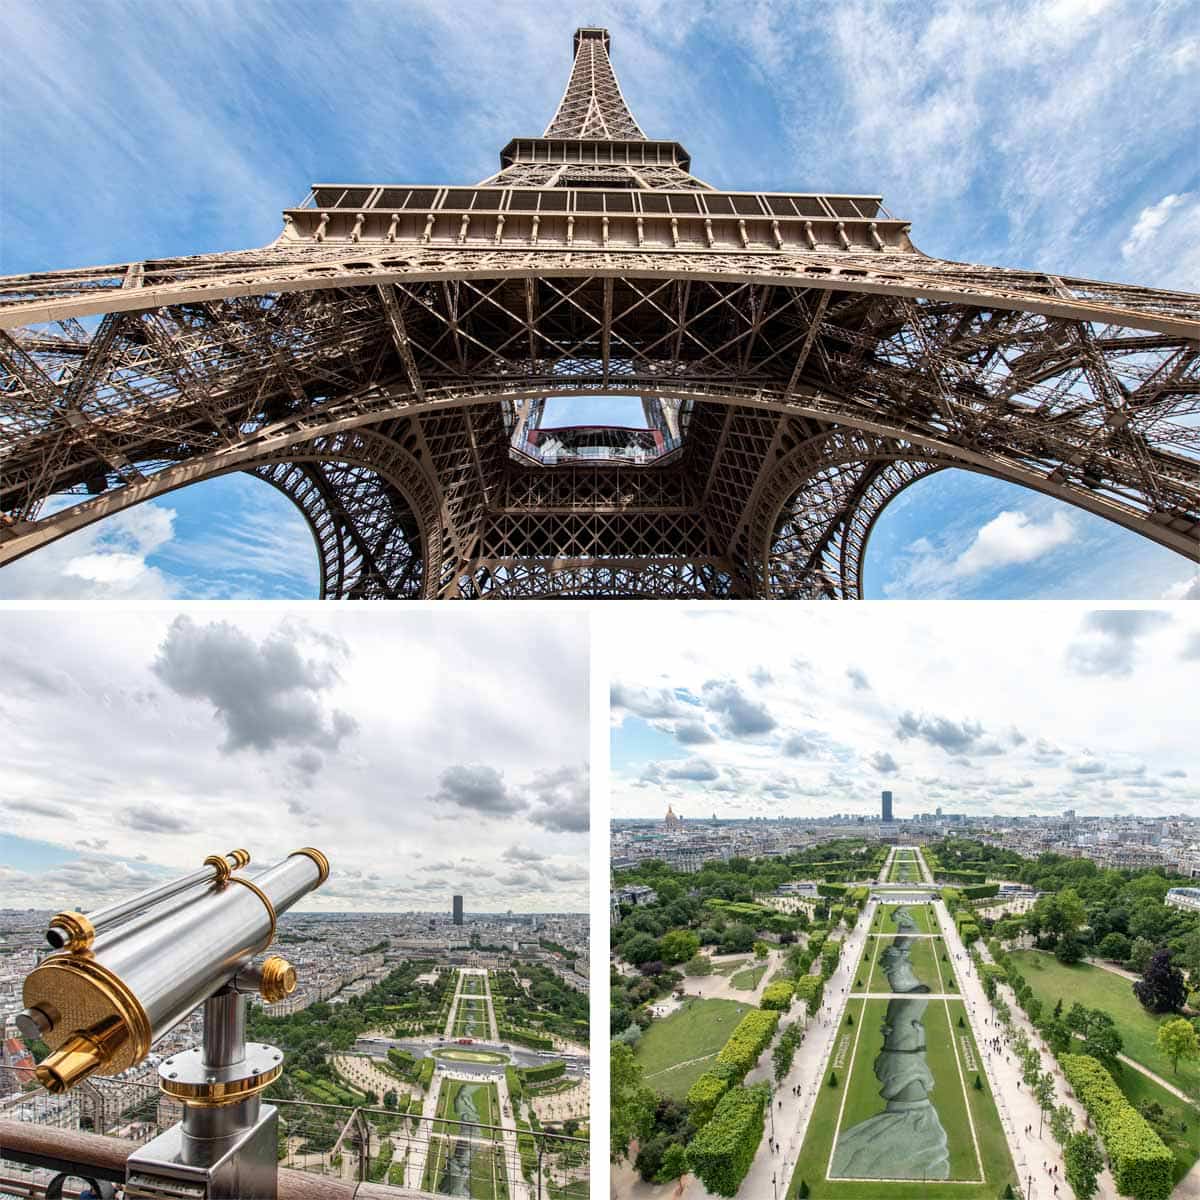 The views of the Eiffel Tower